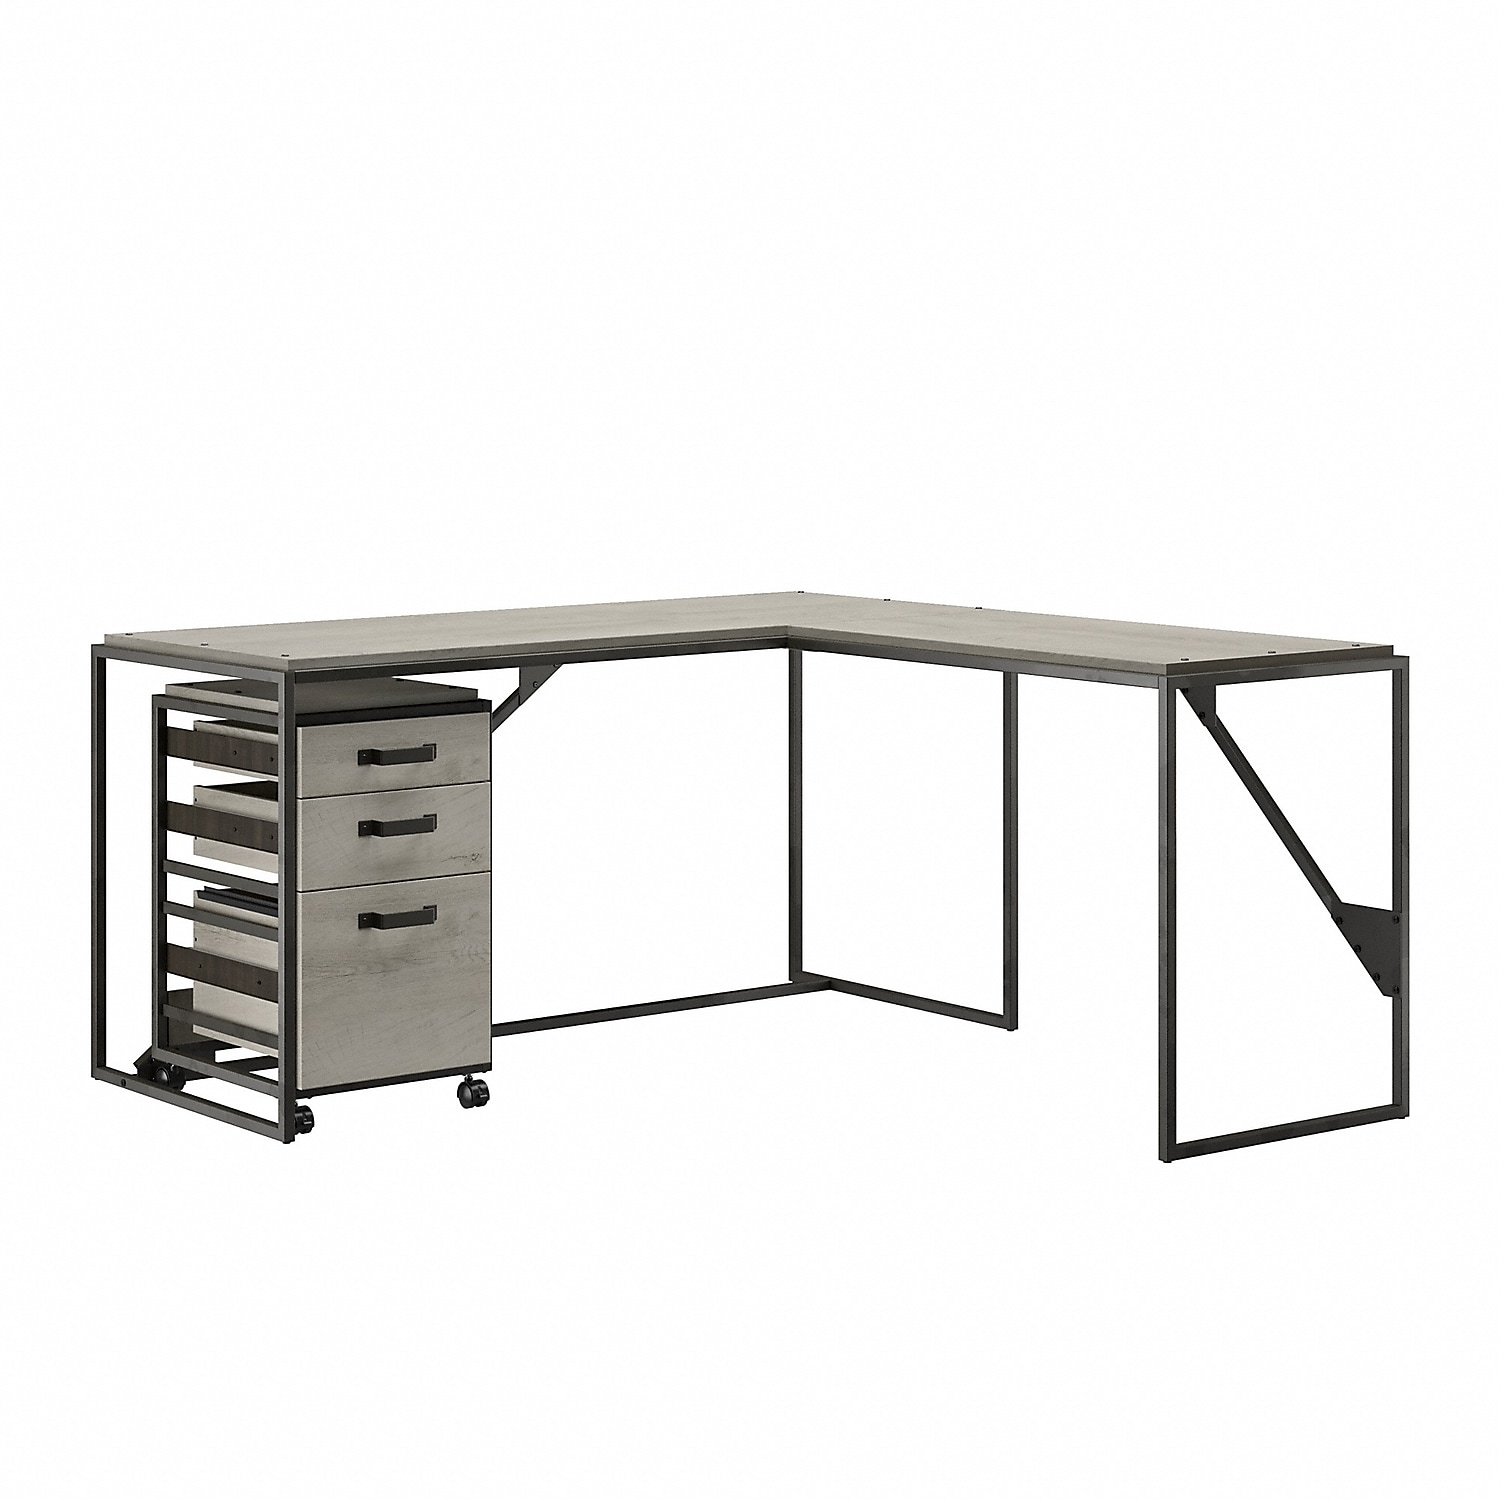 Bush Furniture Refinery 50"W L-Shaped Industrial Desk With File Cabinets, Dark Gray Hickory, Standard Delivery - image 1 of 8